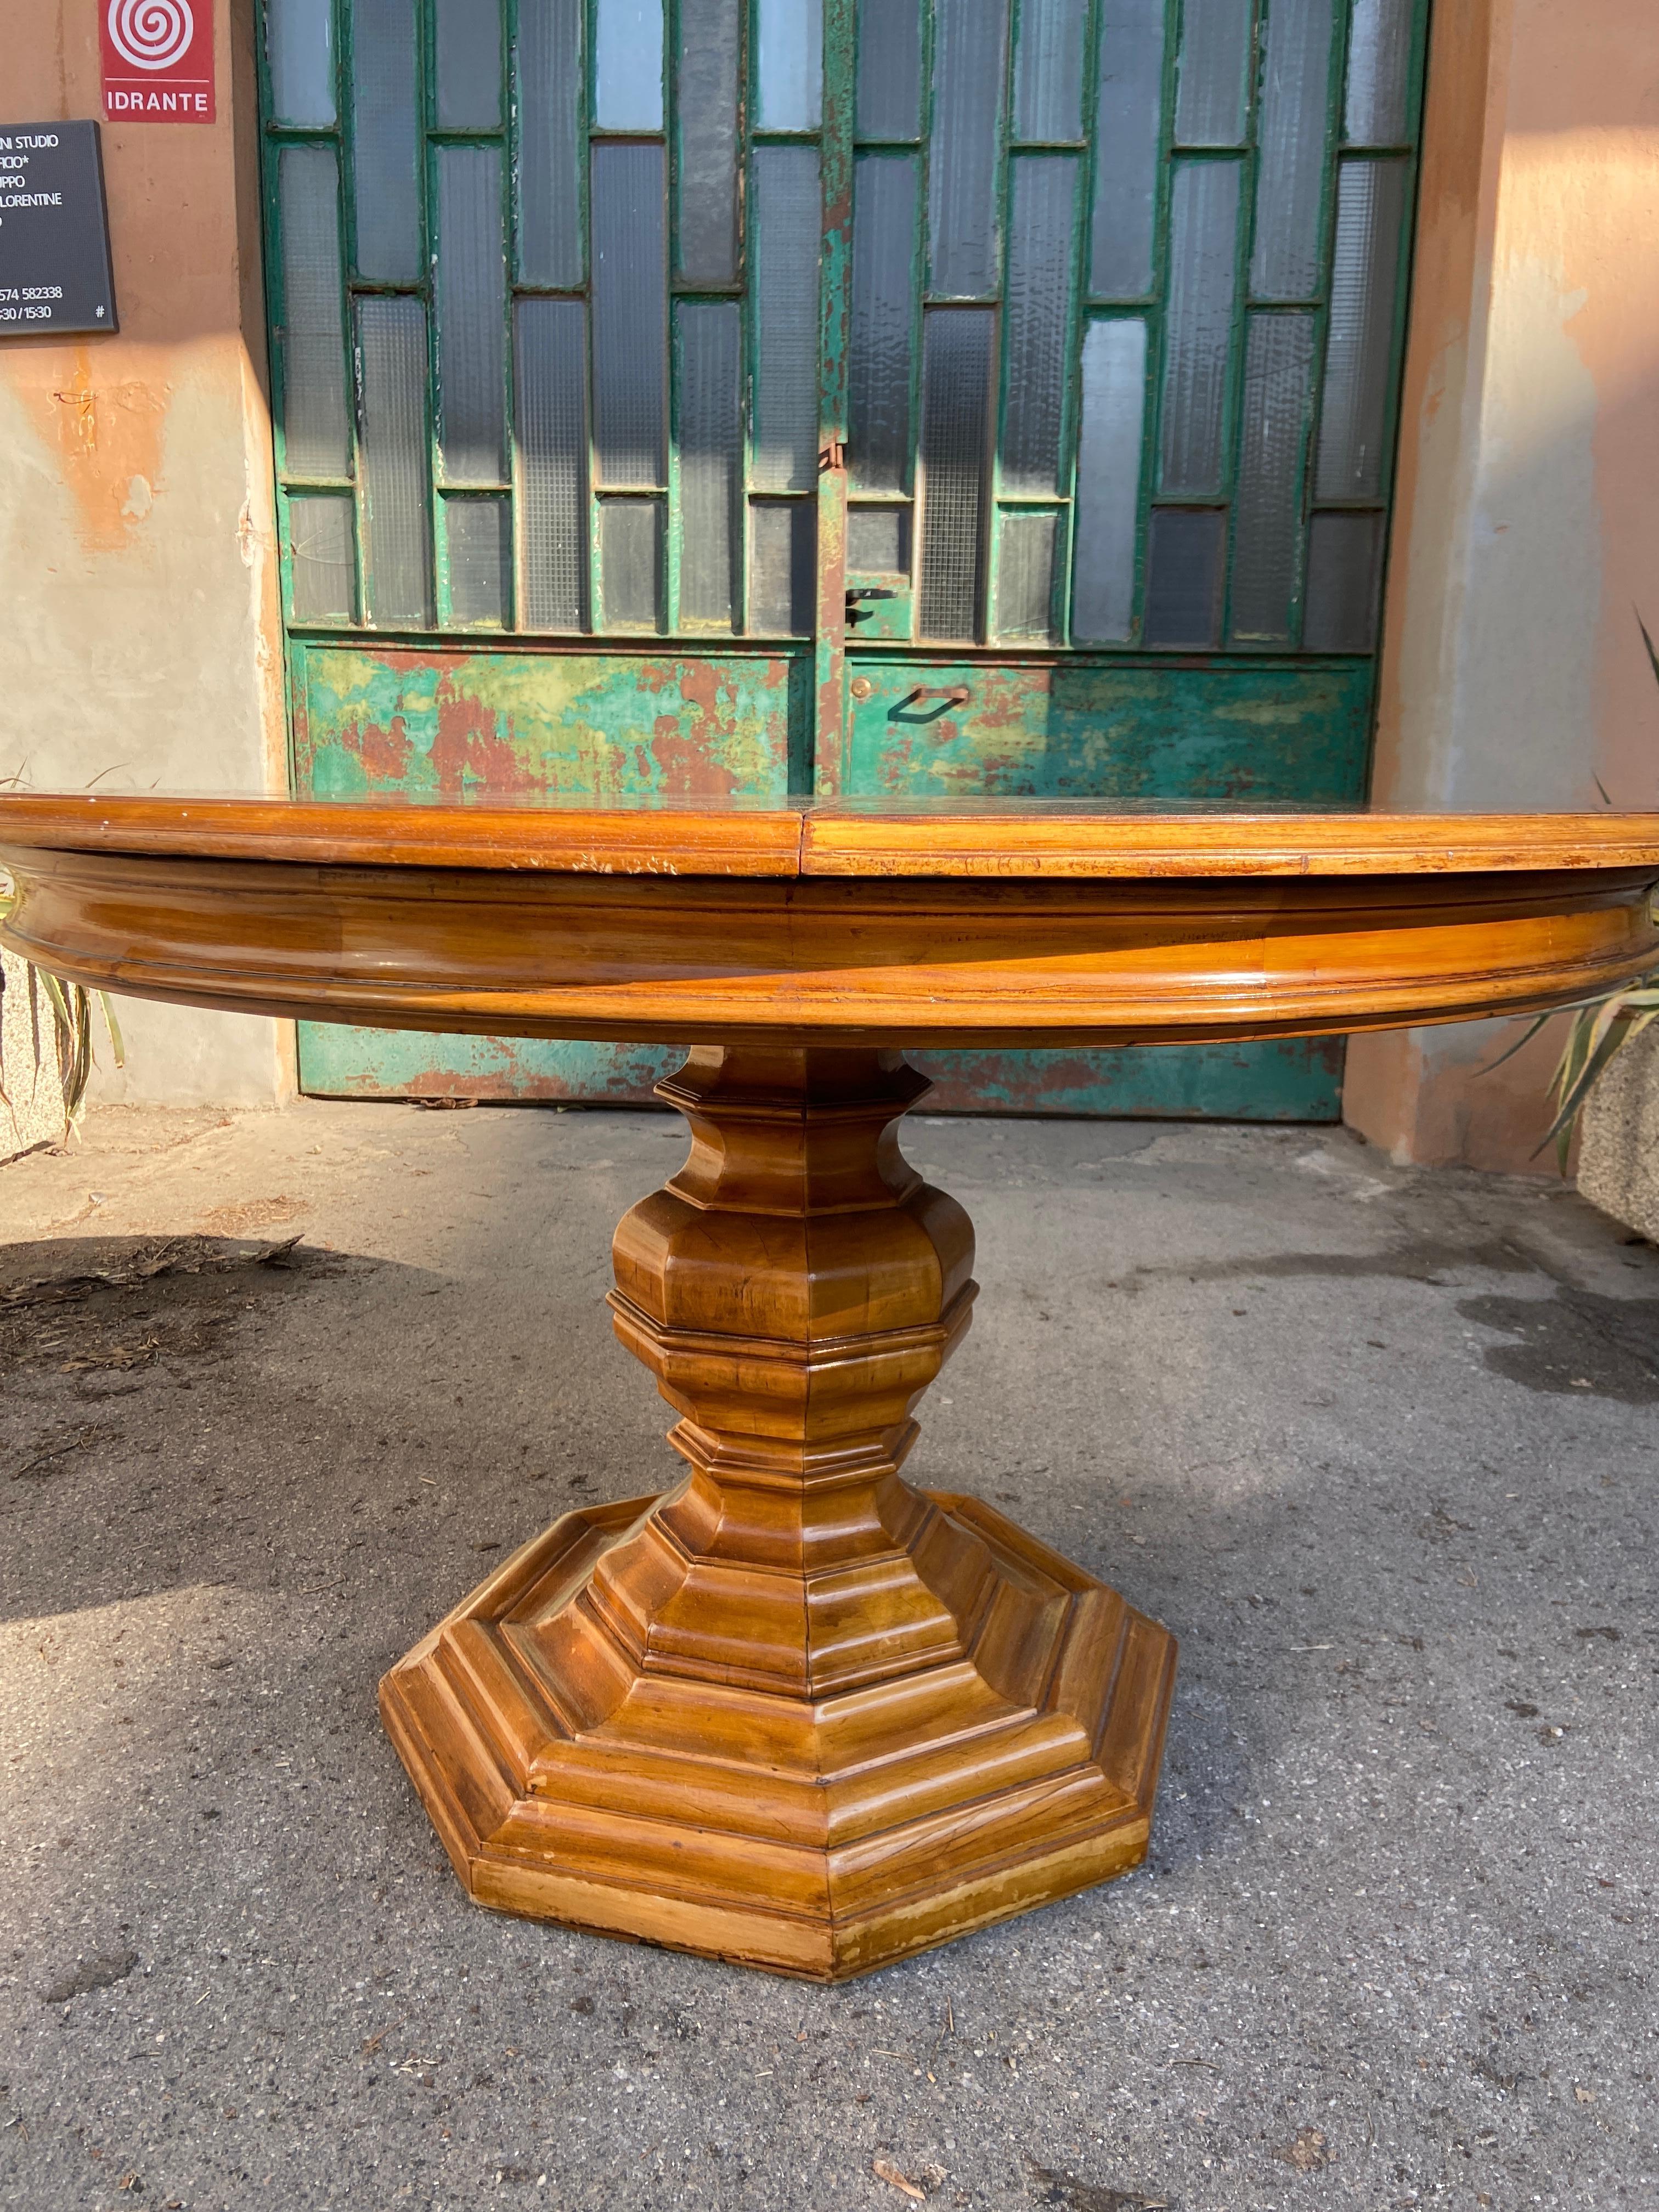 19th Century Italian Octagonal Adjustable Table with Shaped Wooden Leg For Sale 2